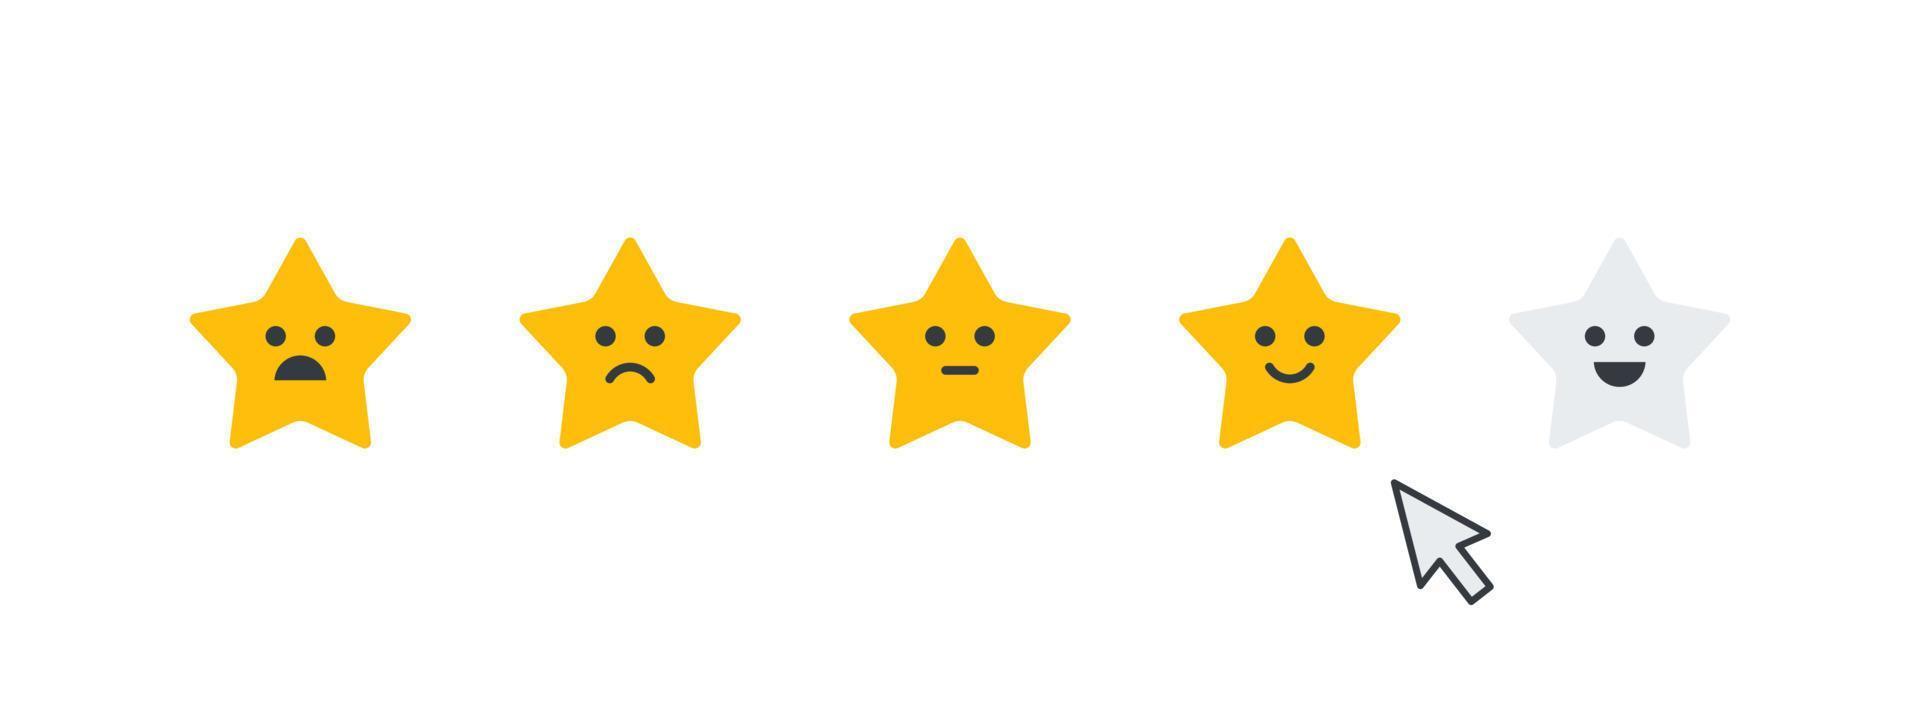 Rating stars icons. Product rating icons. Smileys stars icons. Vector icons